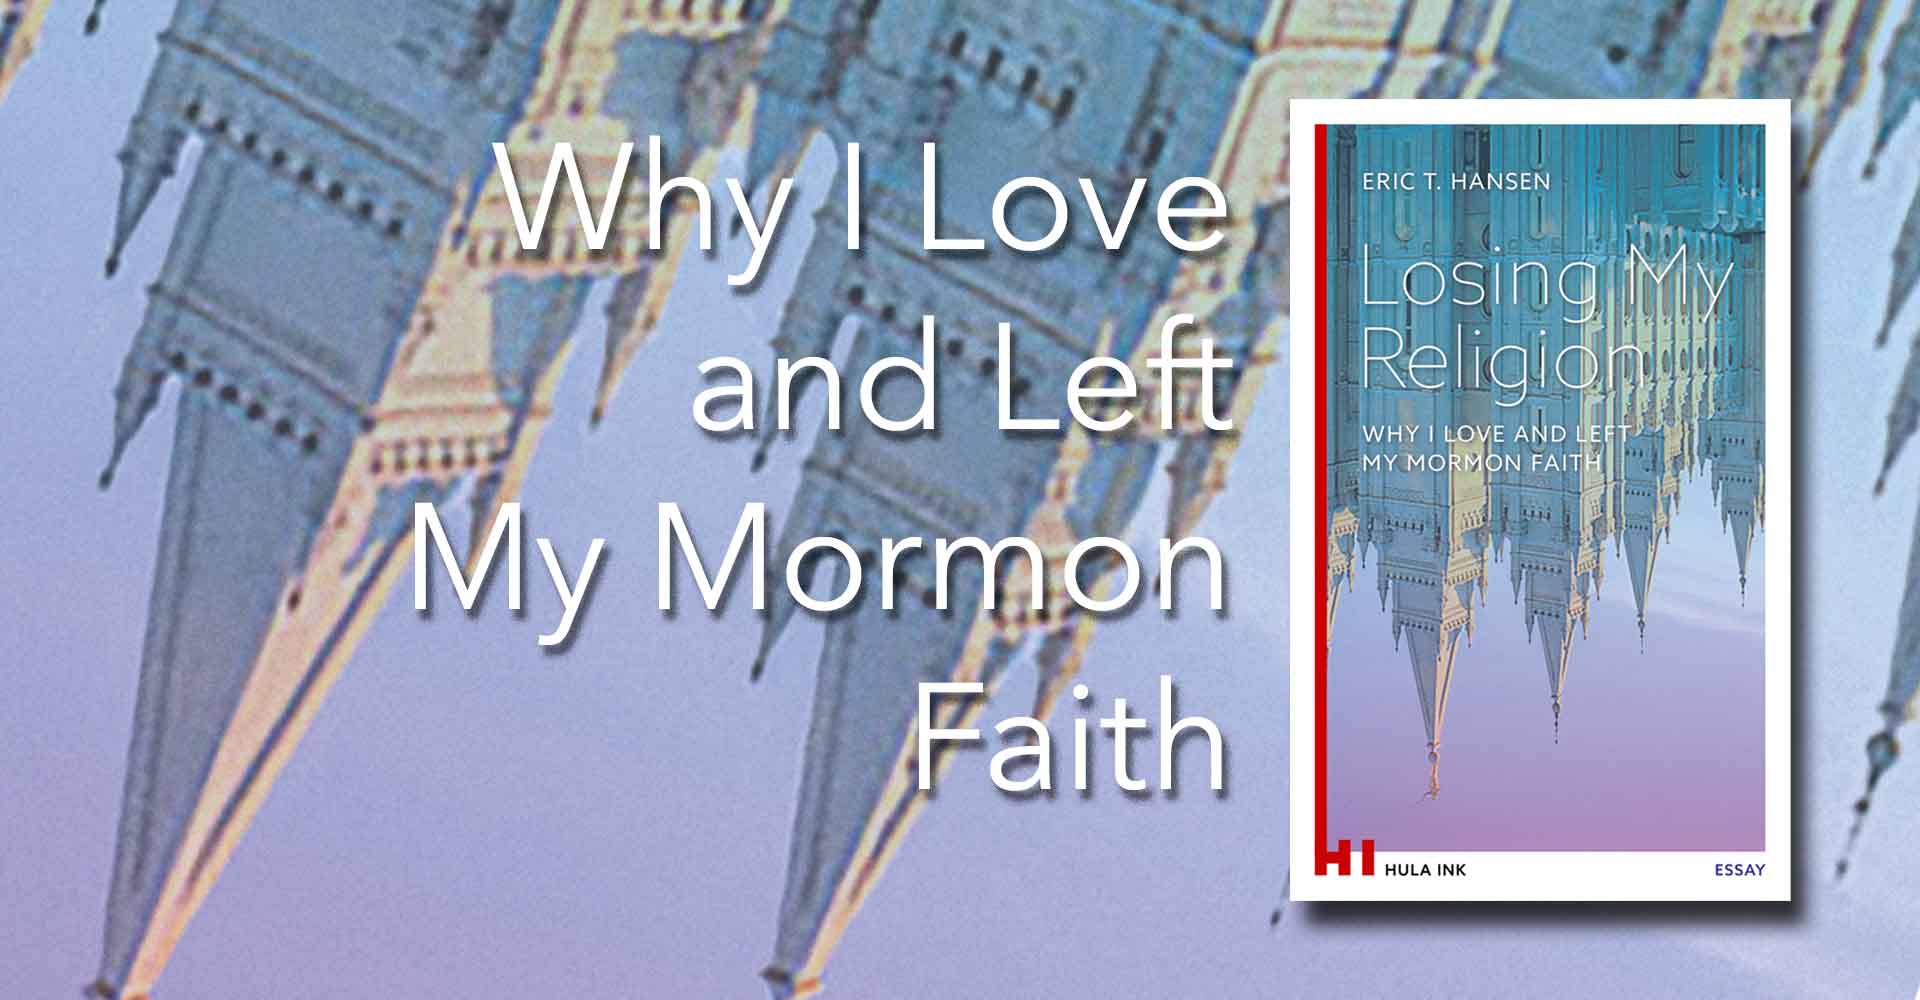 The Book: Losing My Religion